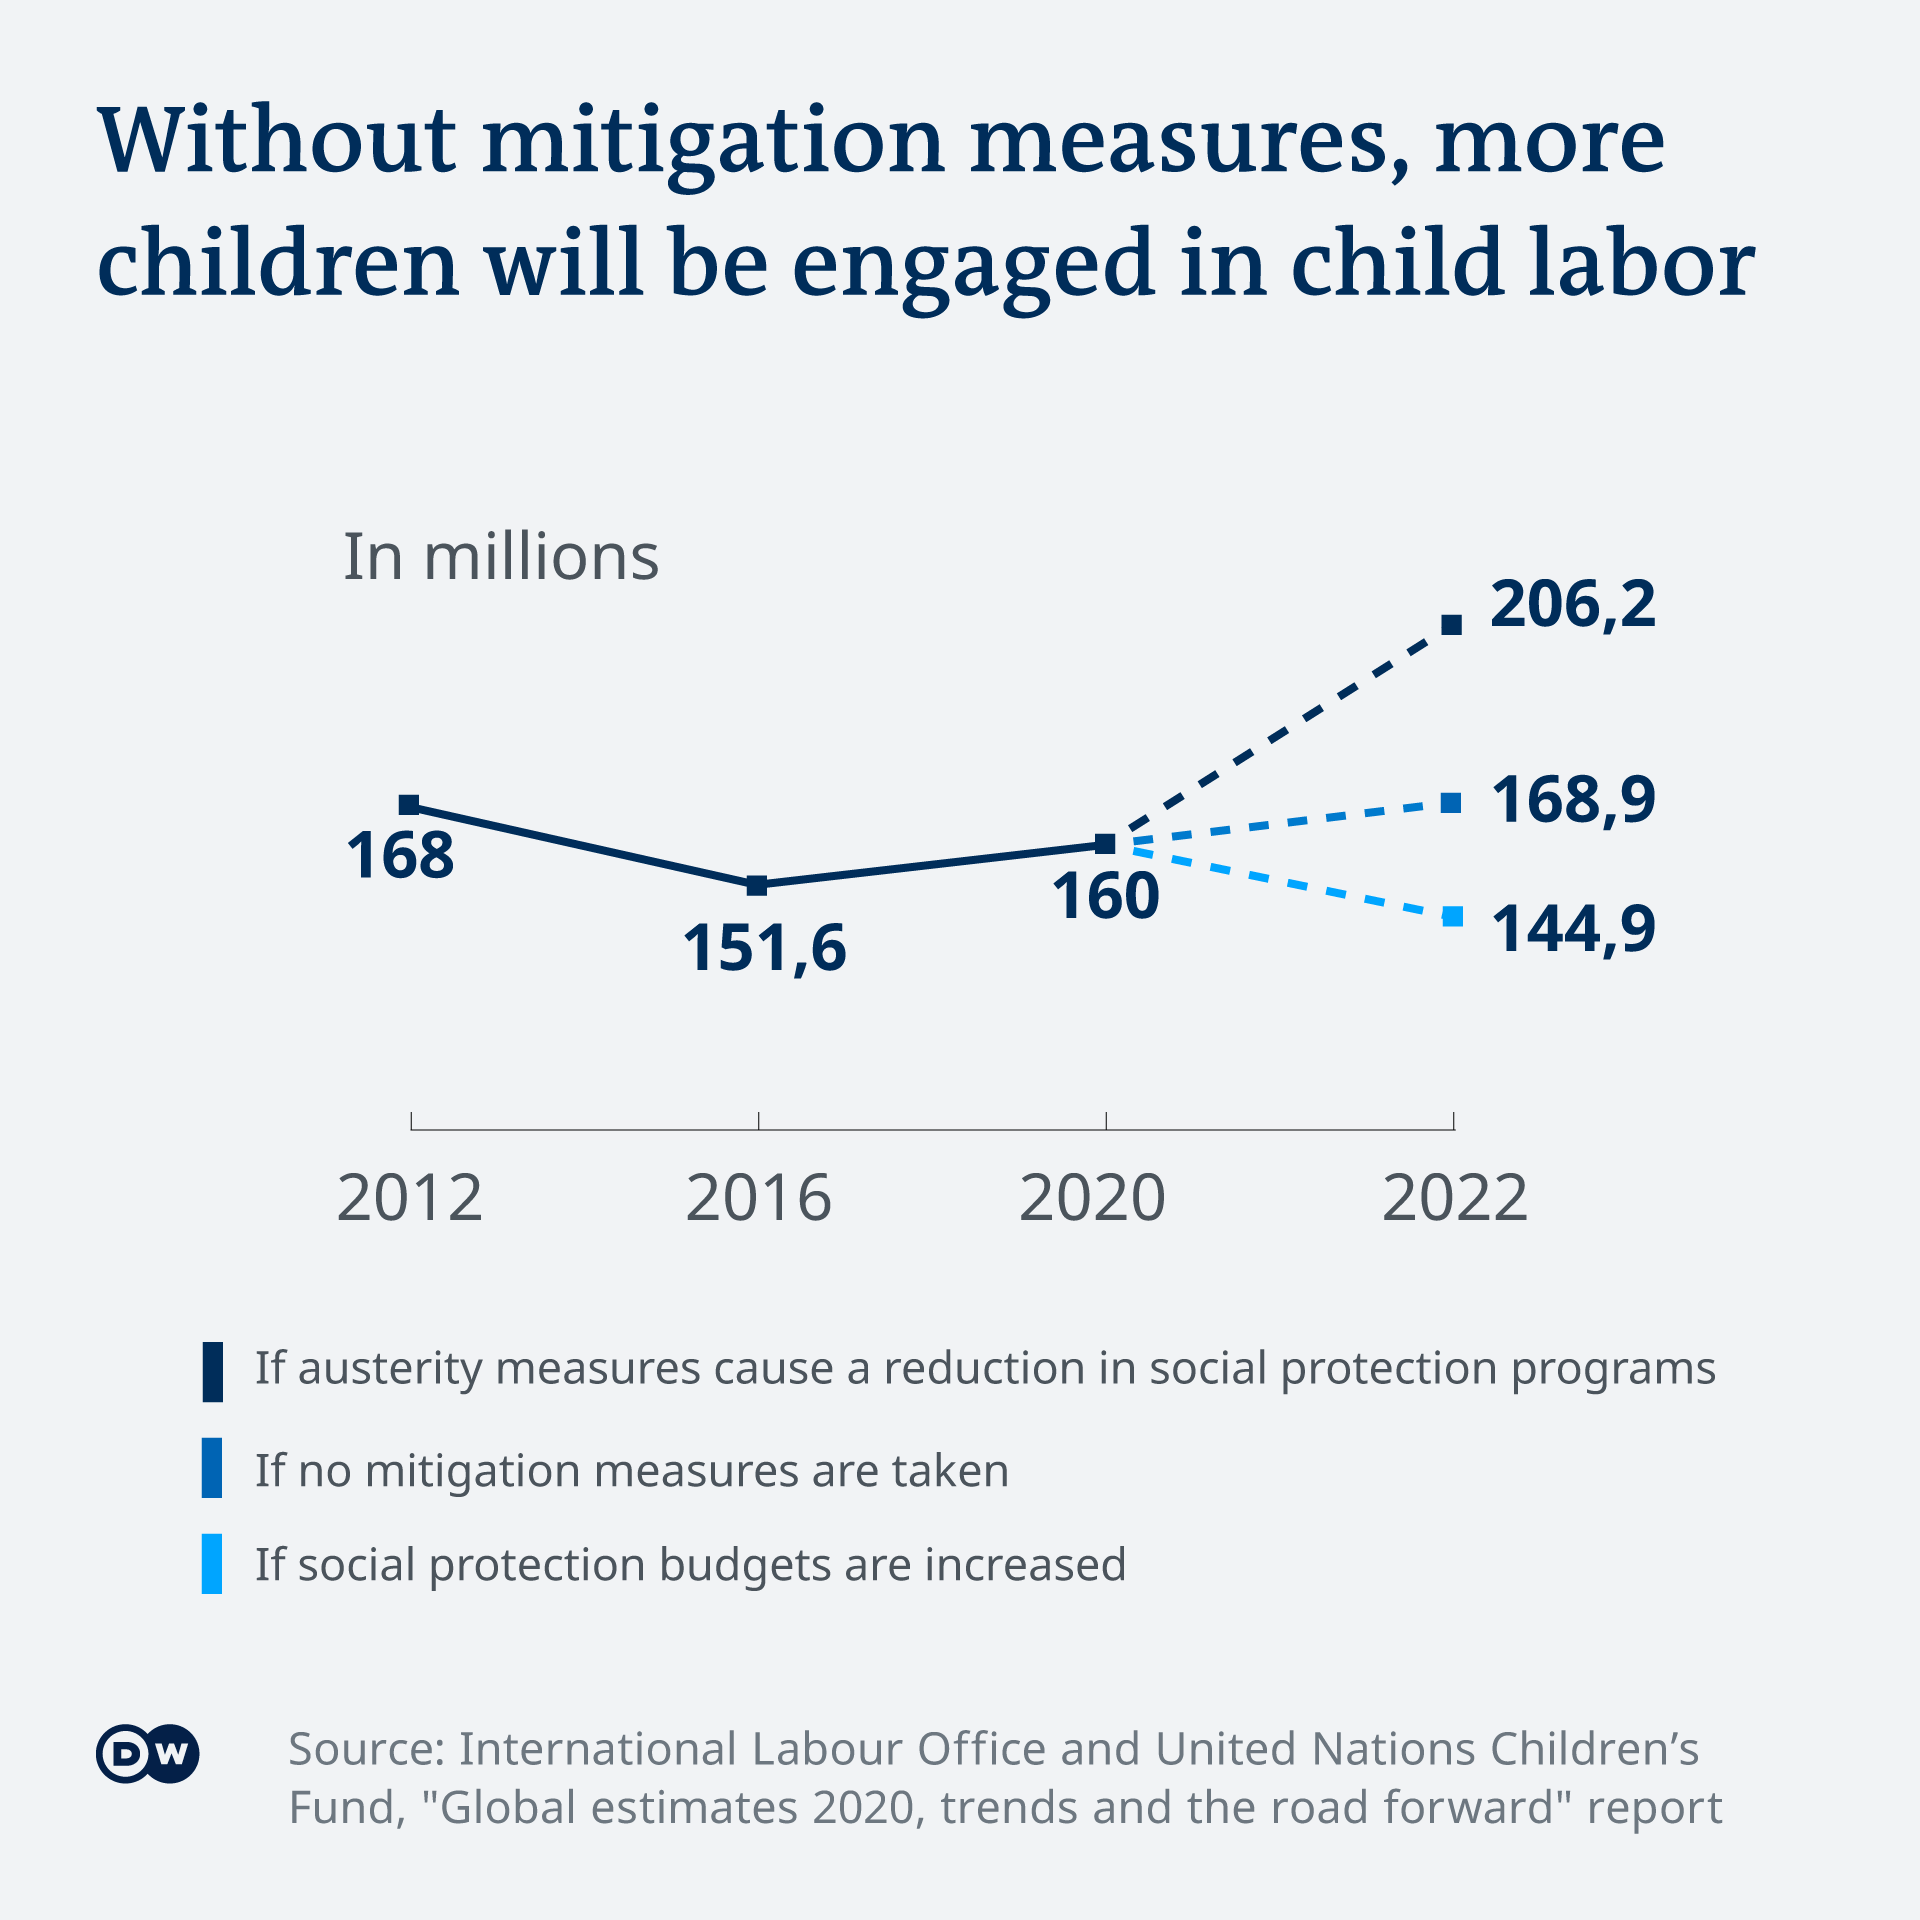 A chart showing that without mitigation measures, more children will likely be engaged in child labor by the end of 2022